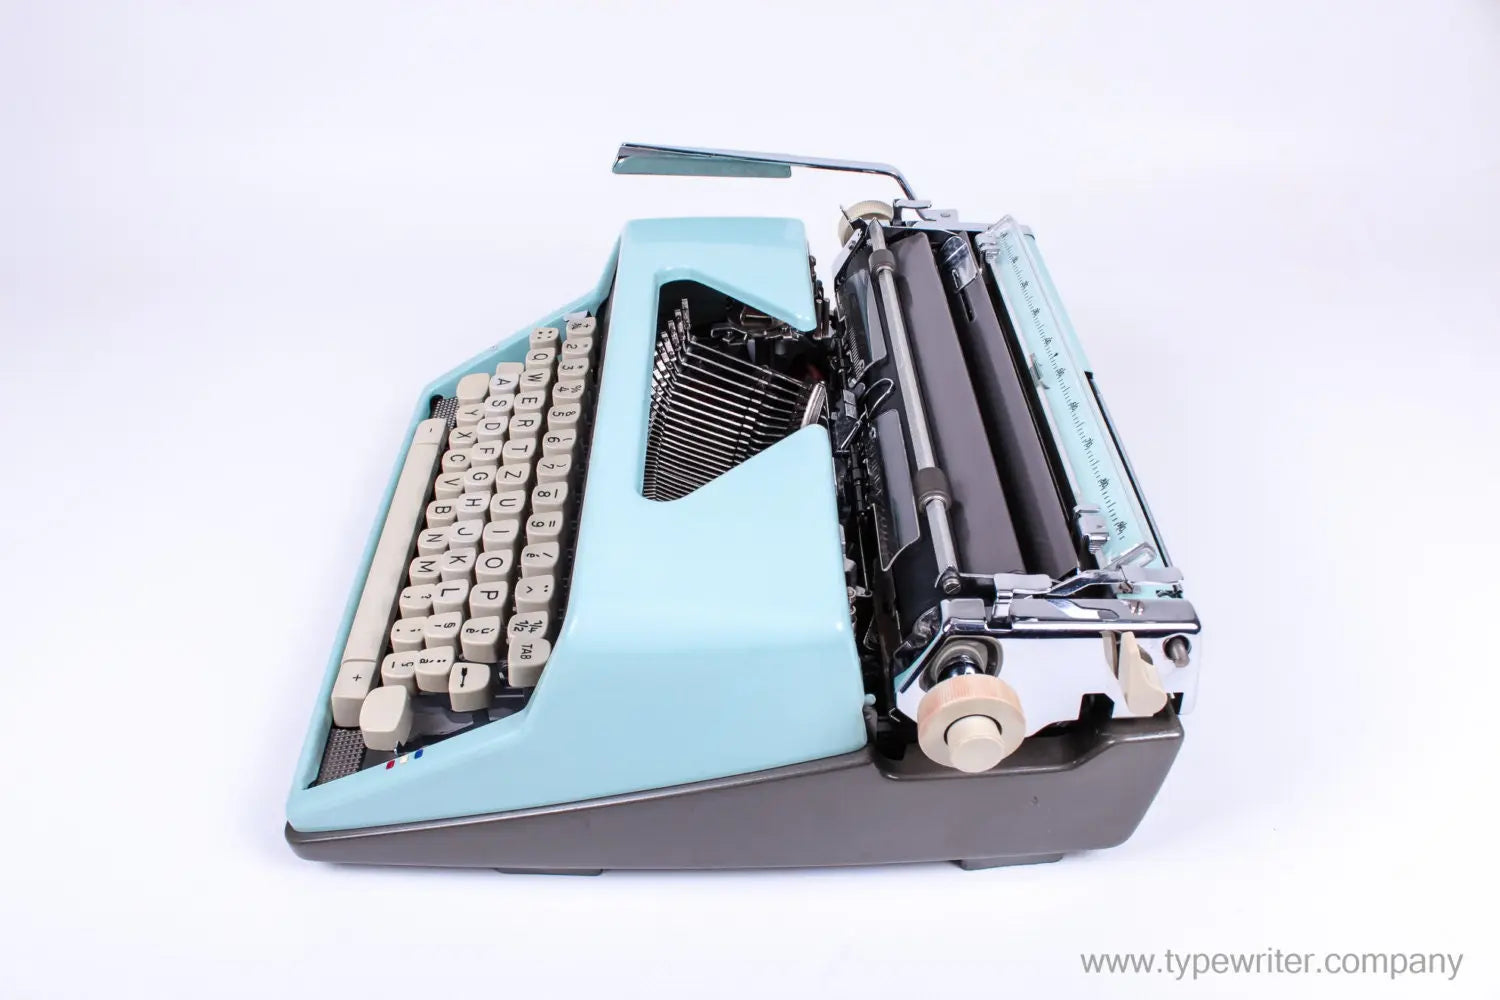 Olympia Monica SM7 Blue Typewriter, Vintage, Mint Condition, Manual Portable, Professionally Serviced by Typewriter.Company - ElGranero Typewriter.Company